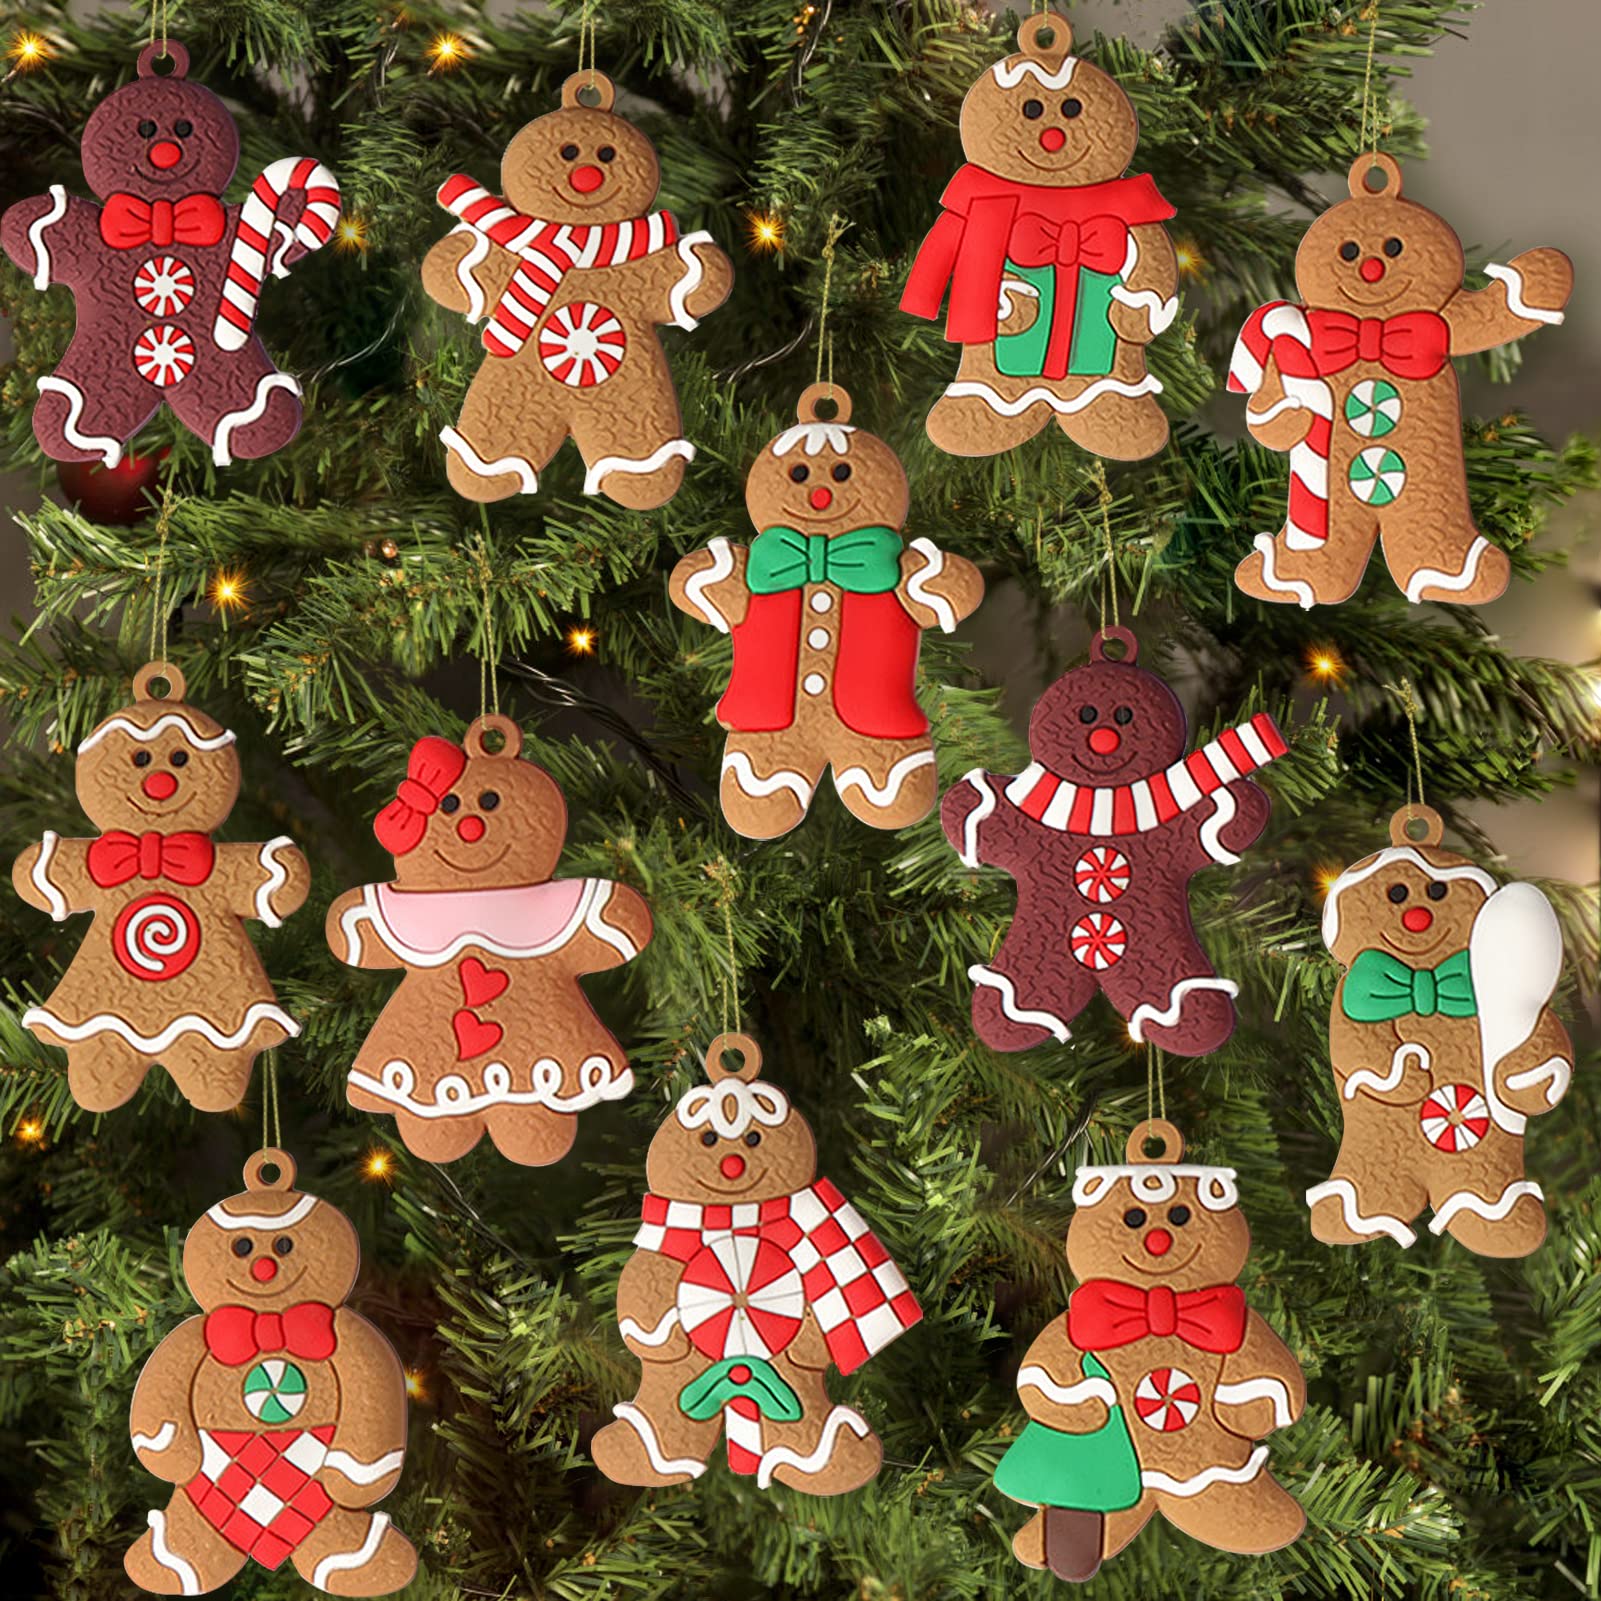 Buy 12pcs Gingerbread Man Ornaments for Christmas Tree Assorted ...